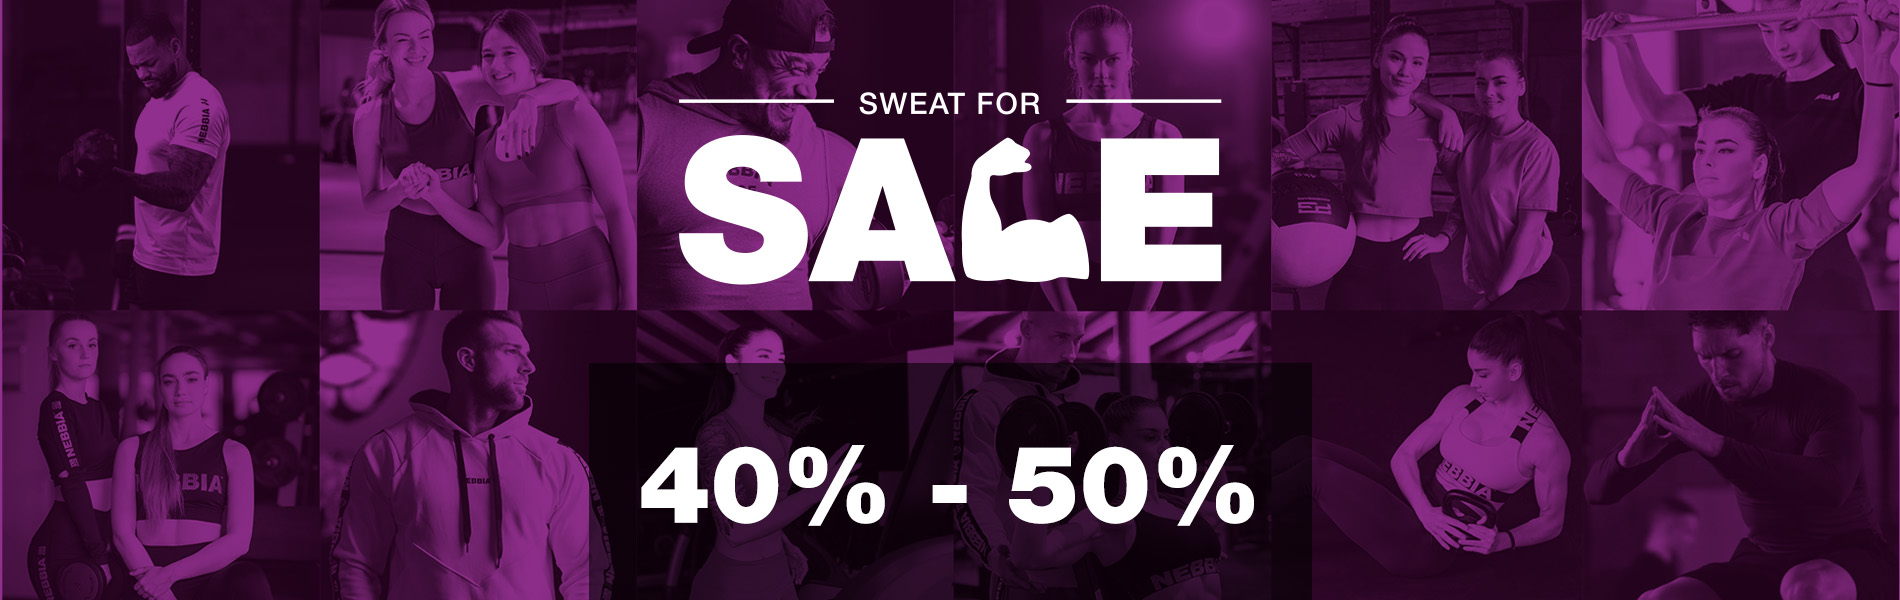 SWEAT FOR SALE from -40% to -50%